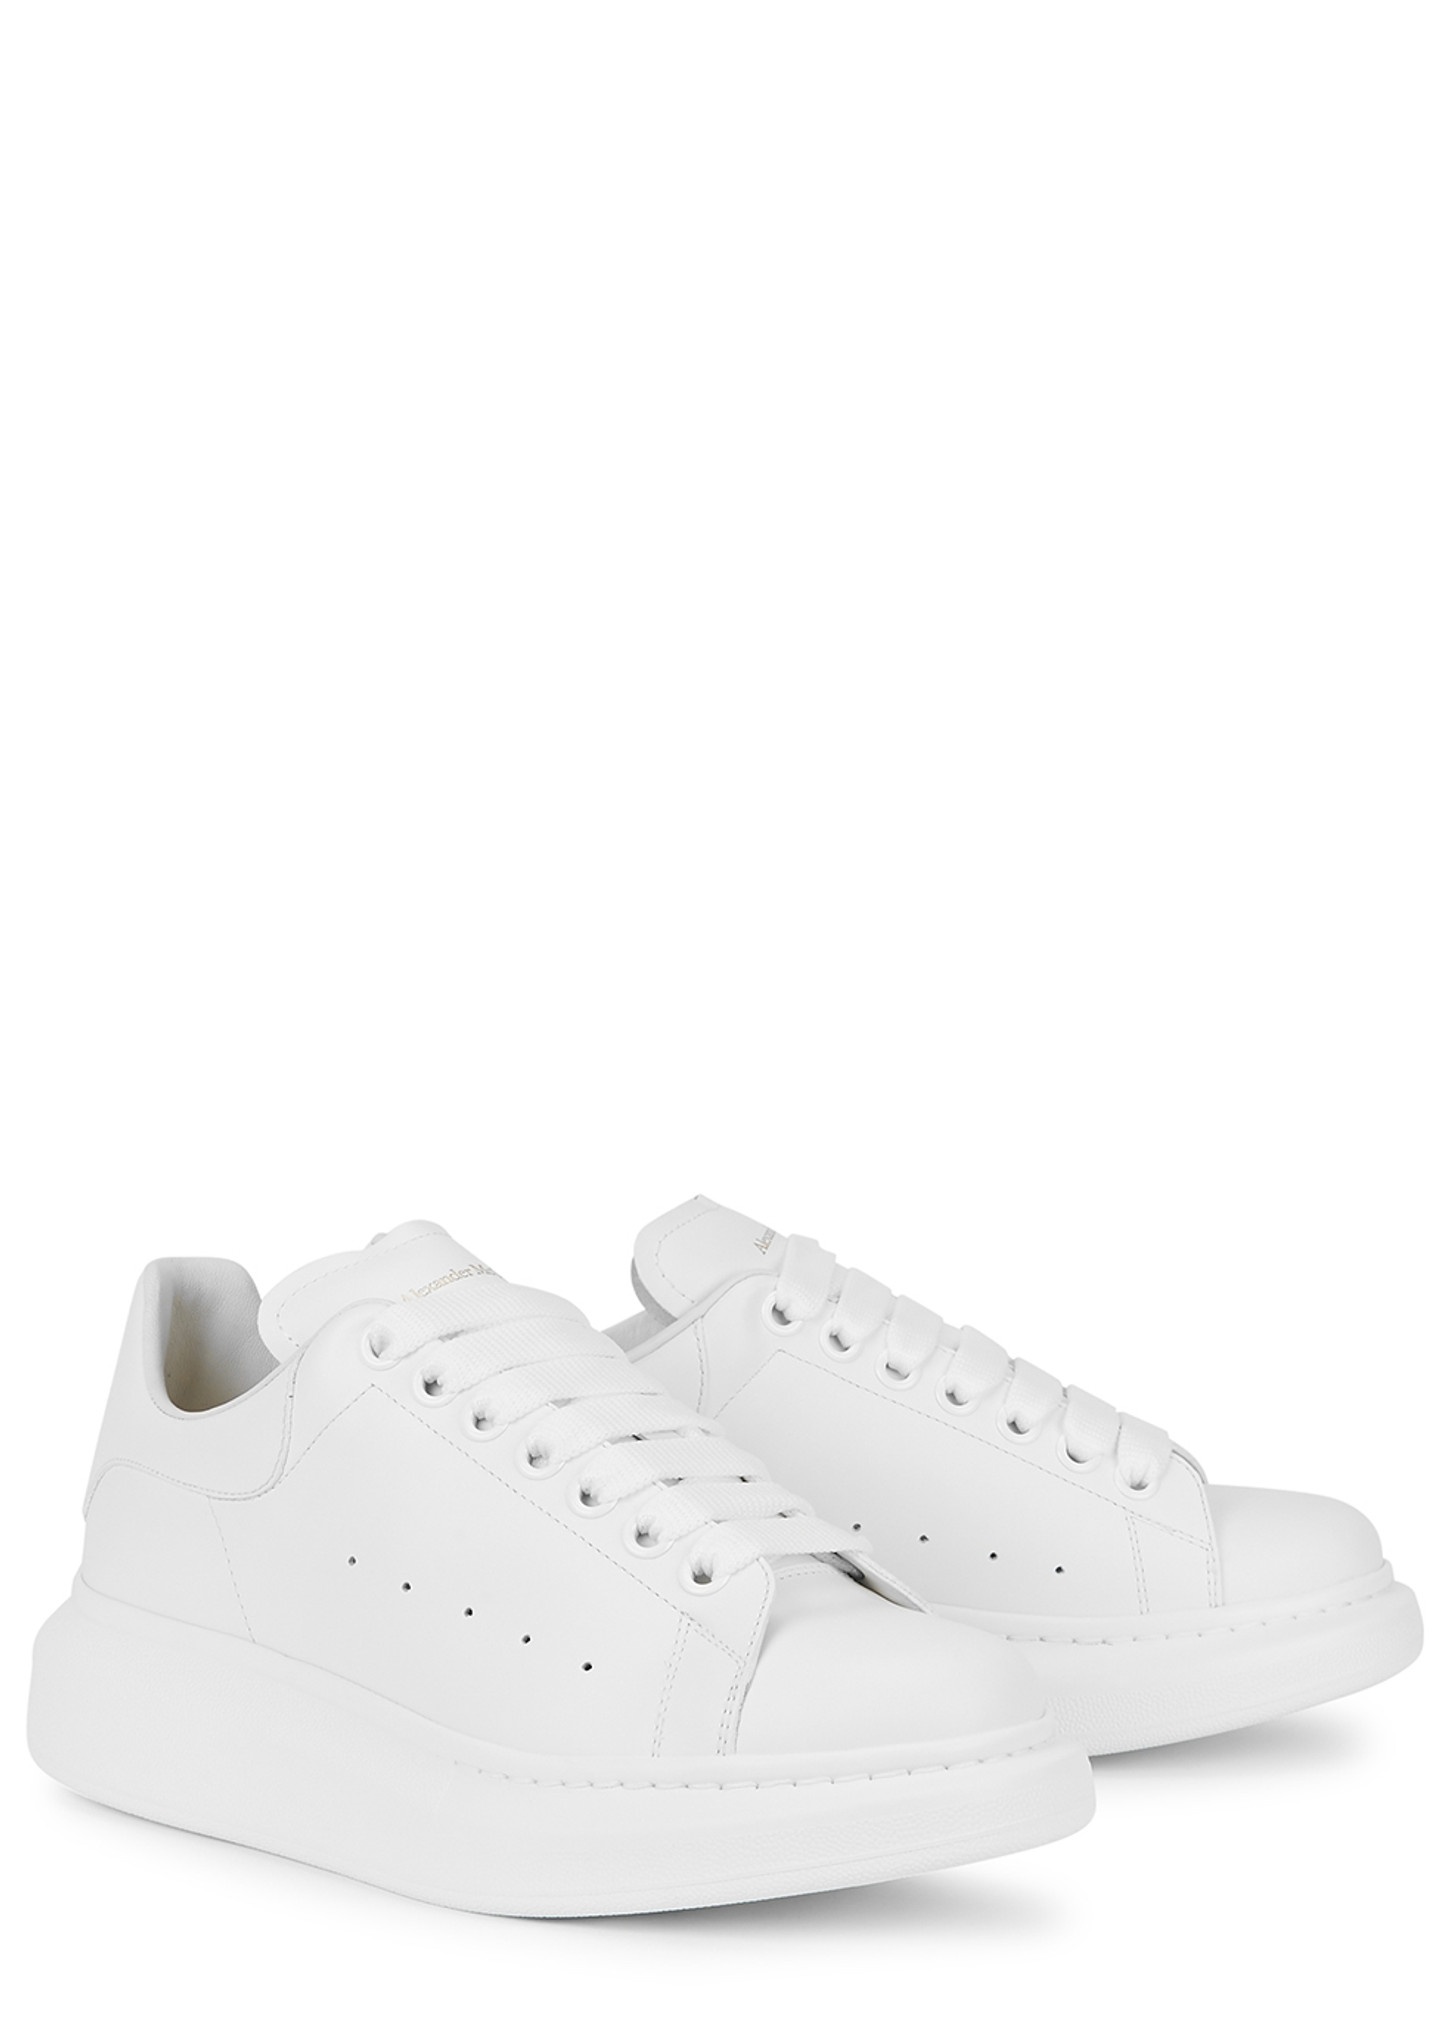 Oversized white leather sneakers - 2